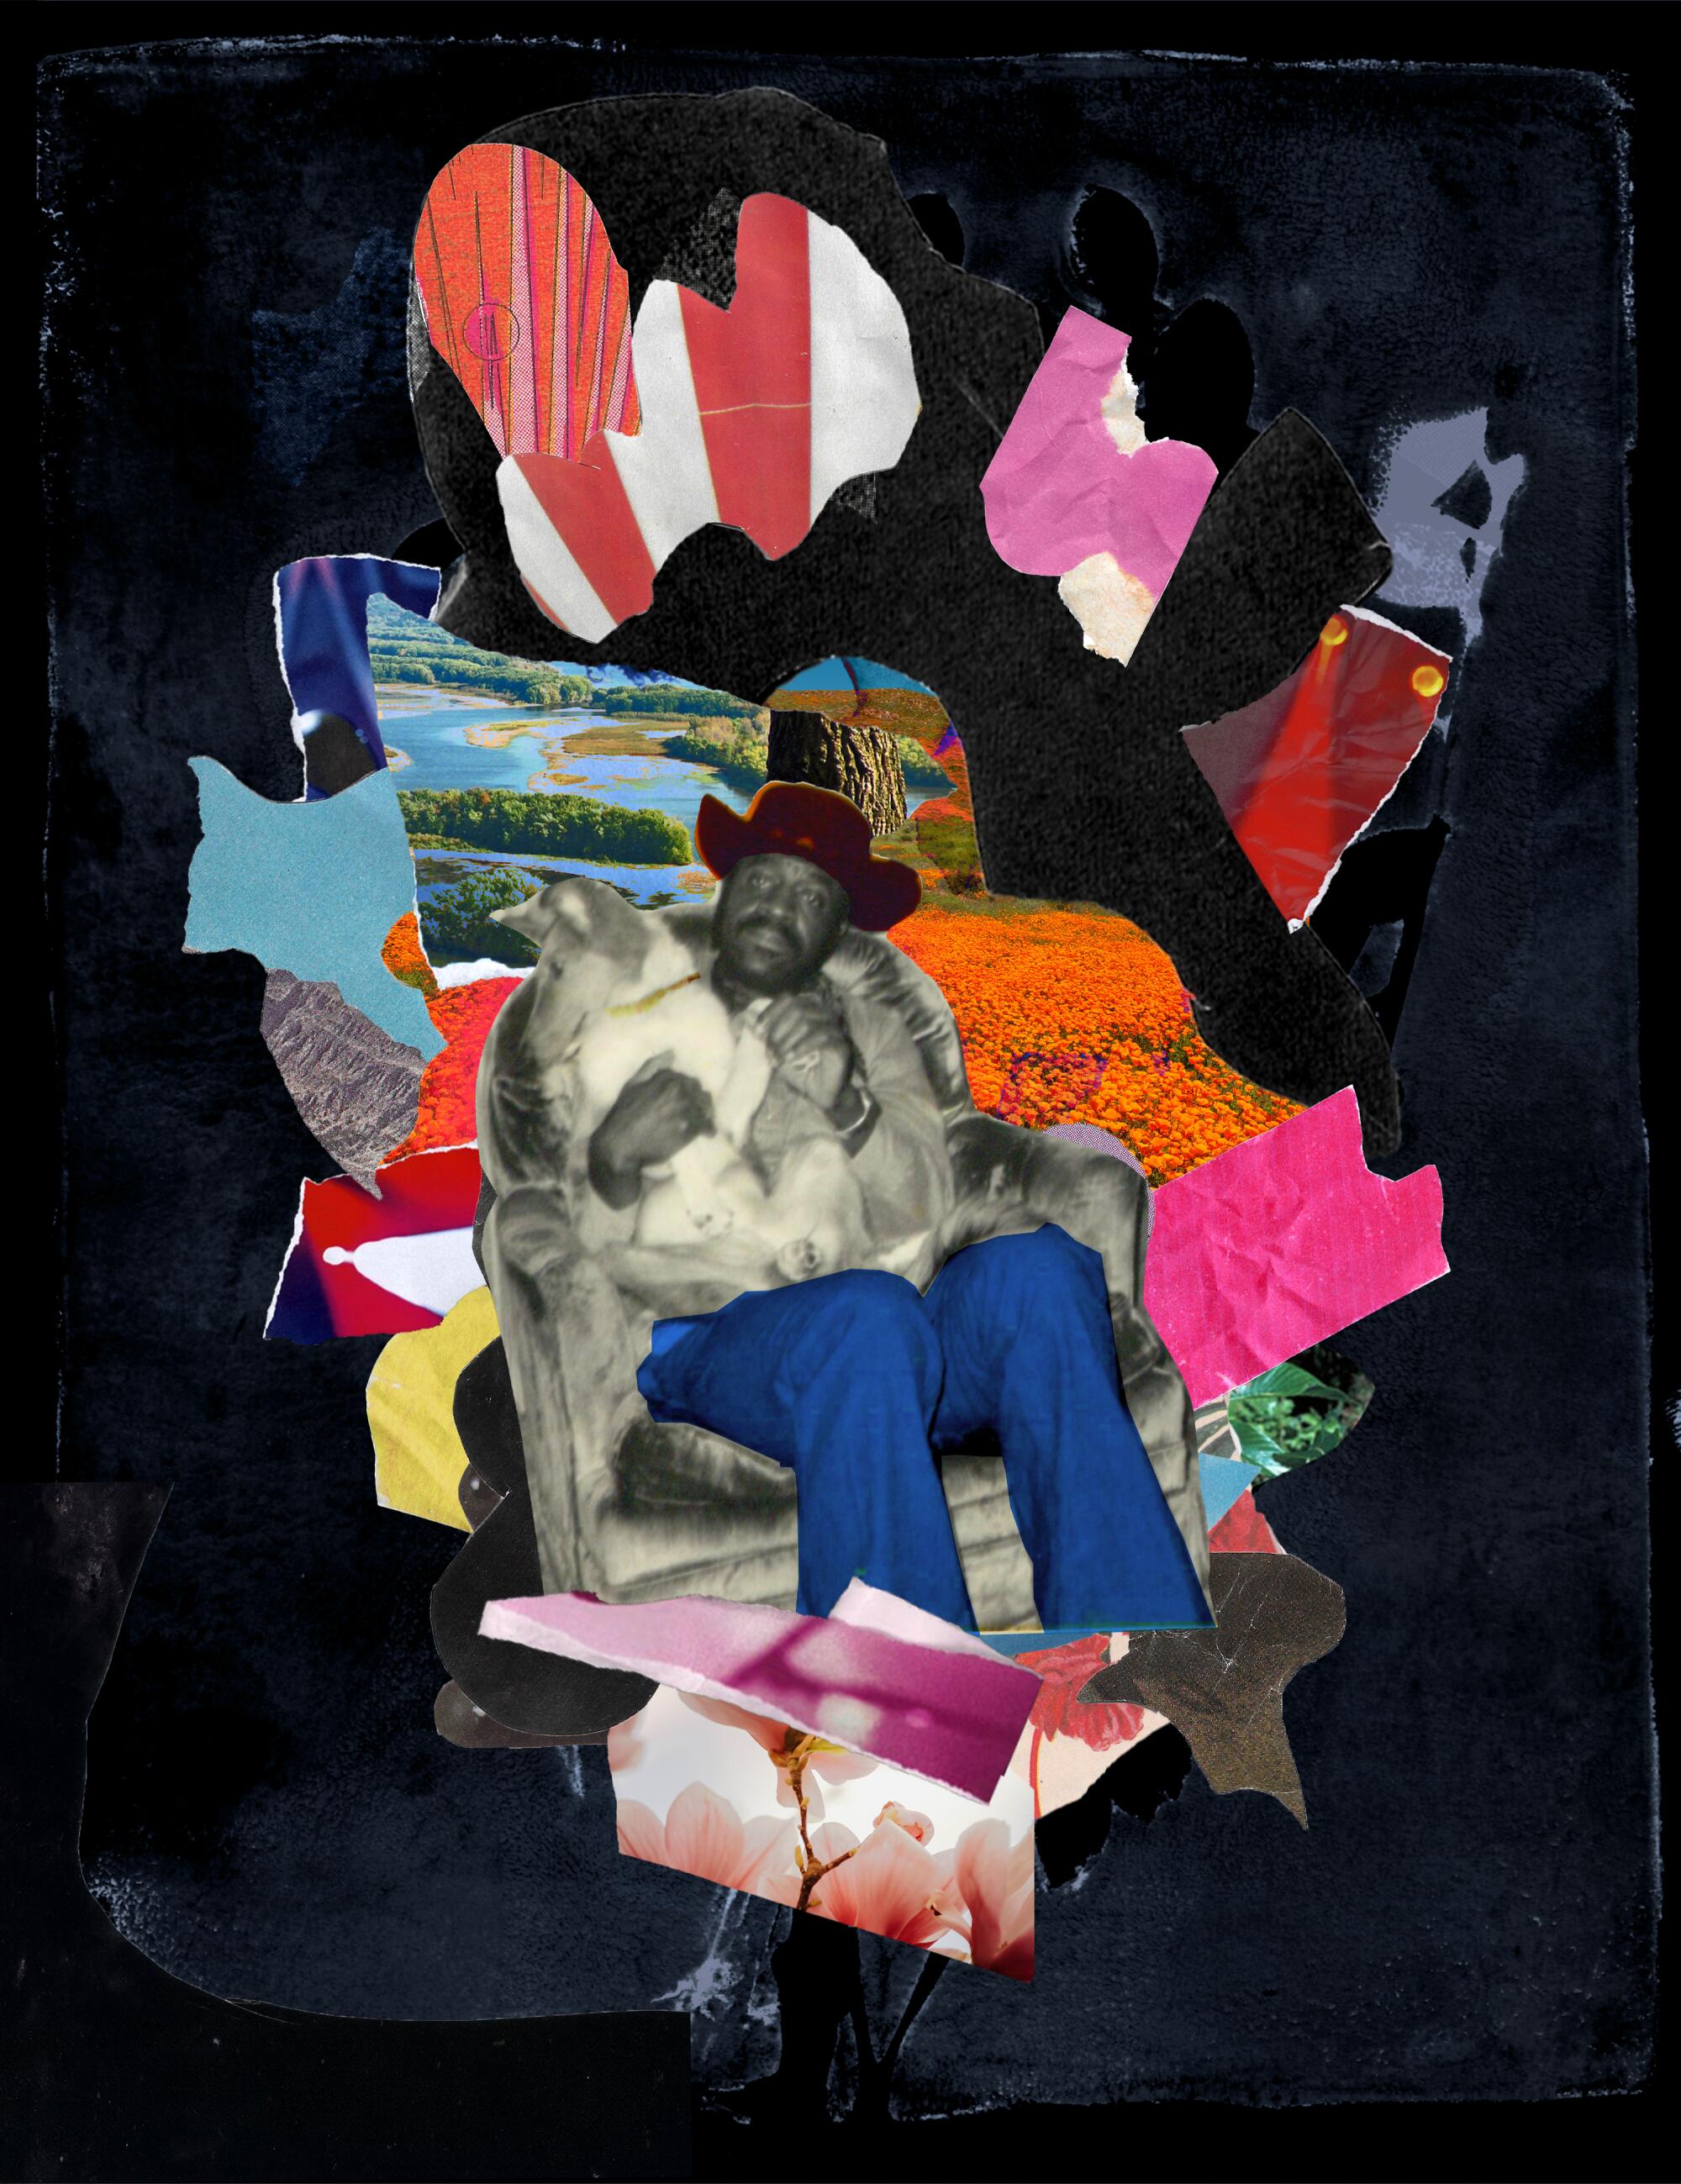 musician Jimmy Holiday in a cowboy hat sitting in an armchair holding a dog surrounded by colorful abstract cutouts